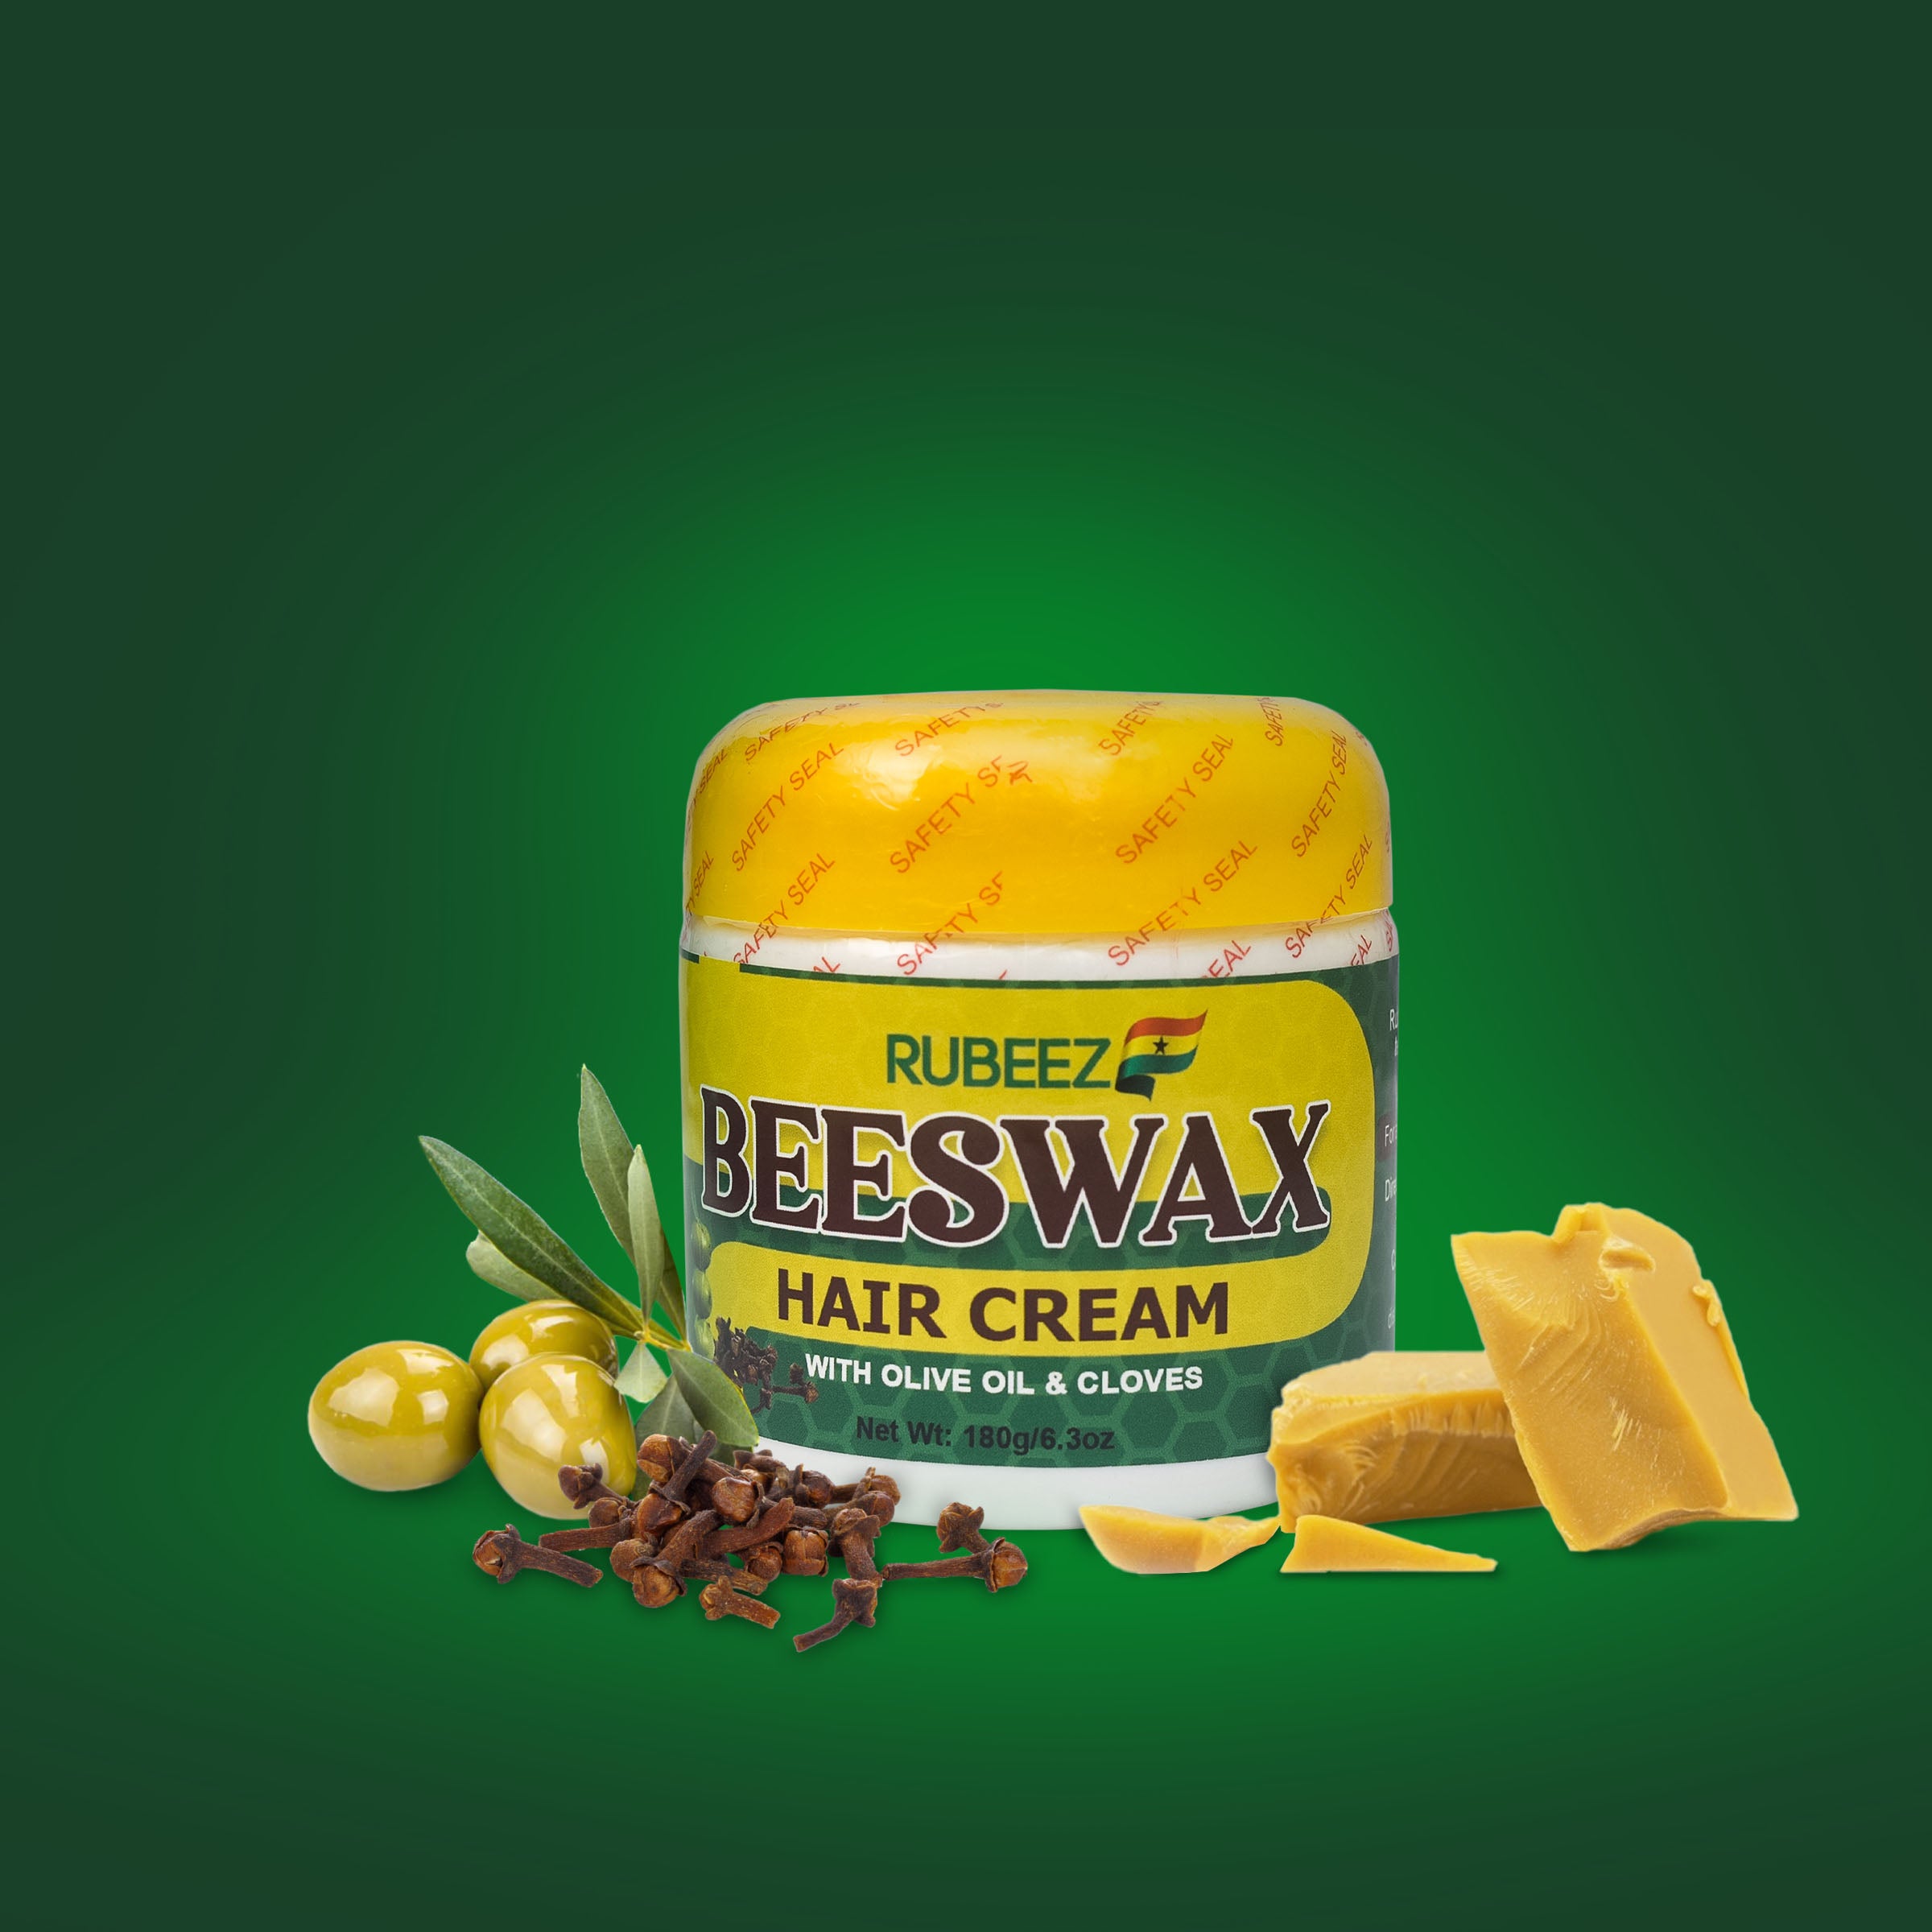 Beeswax Hair Cream Olive Oil And Cloves – Rubeez Beeswax